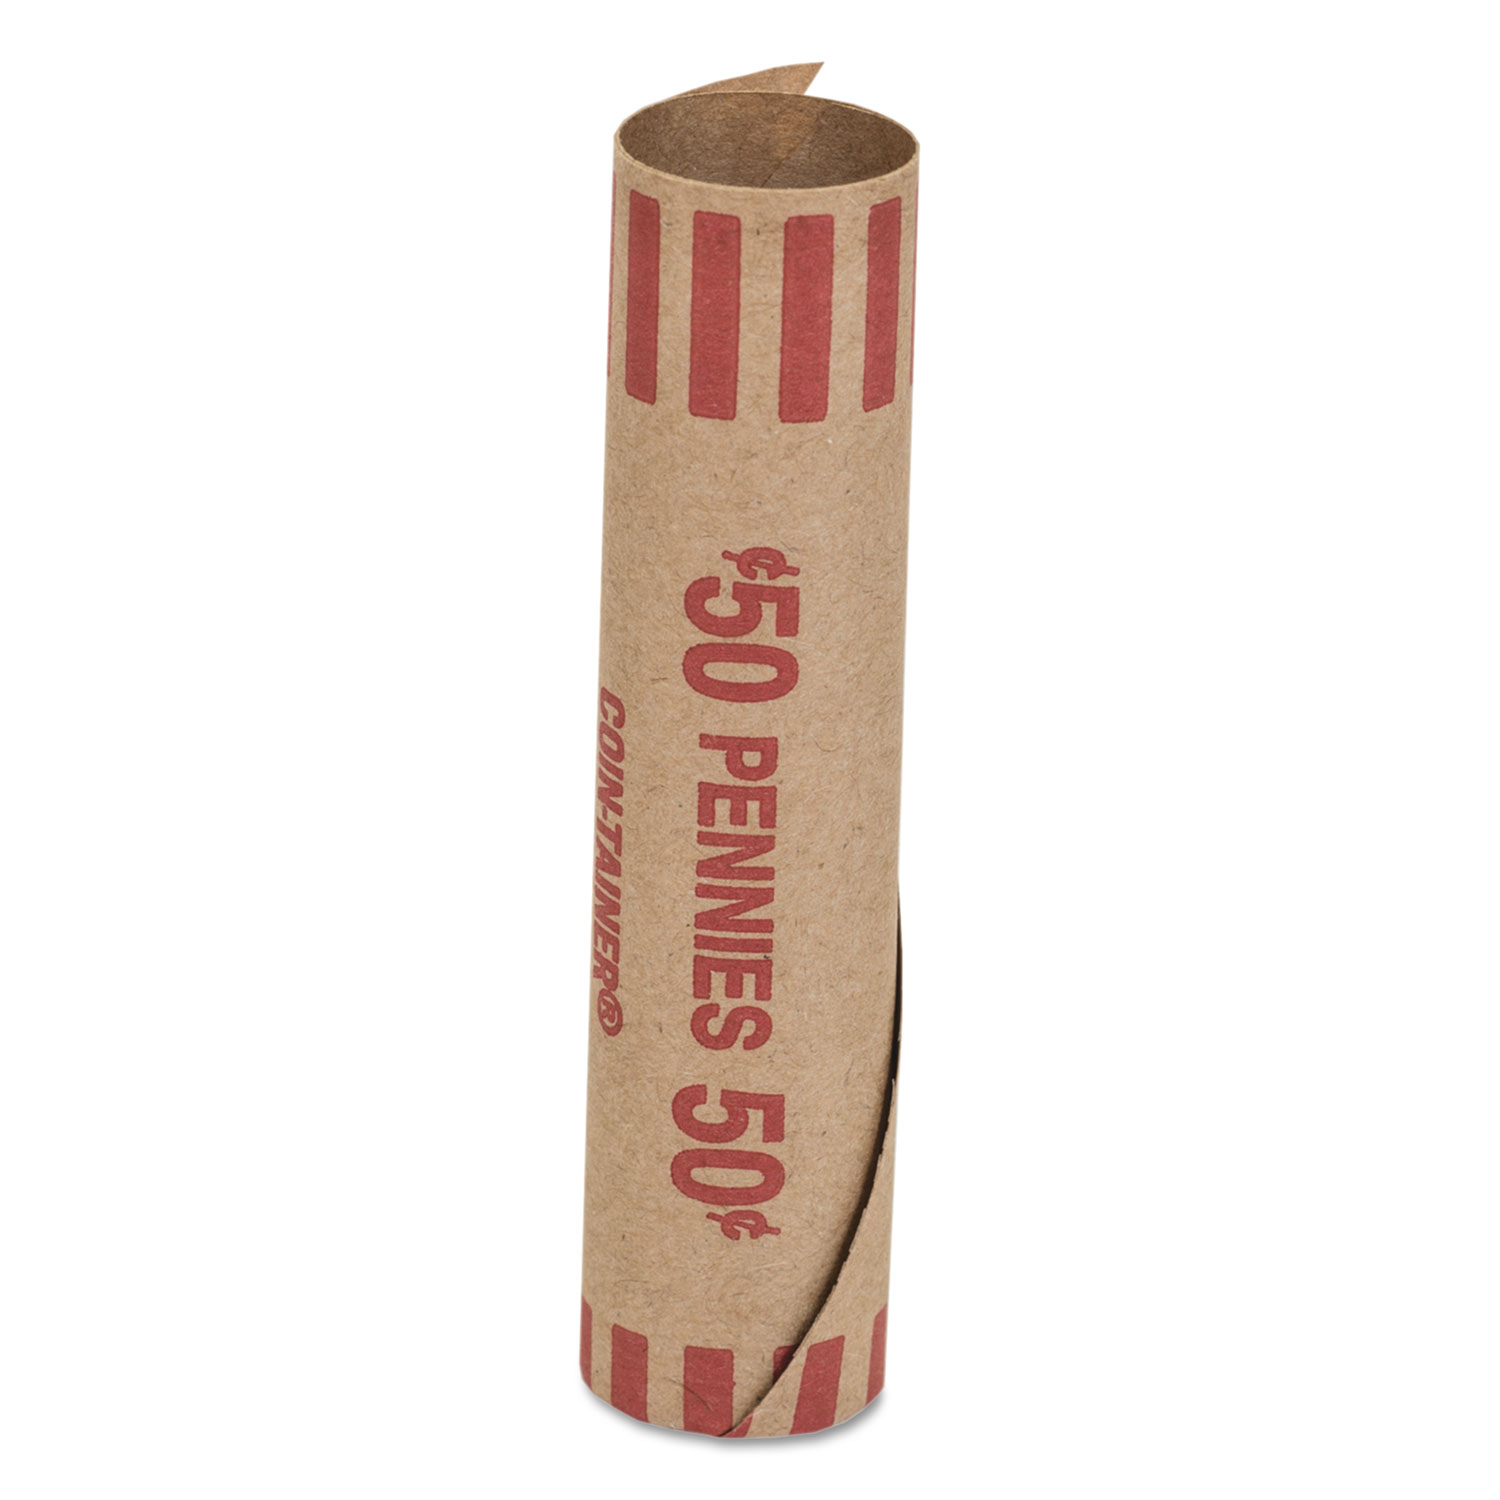 Preformed Tubular Coin Wrappers, Pennies, $.50, 1000 Wrappers/Box